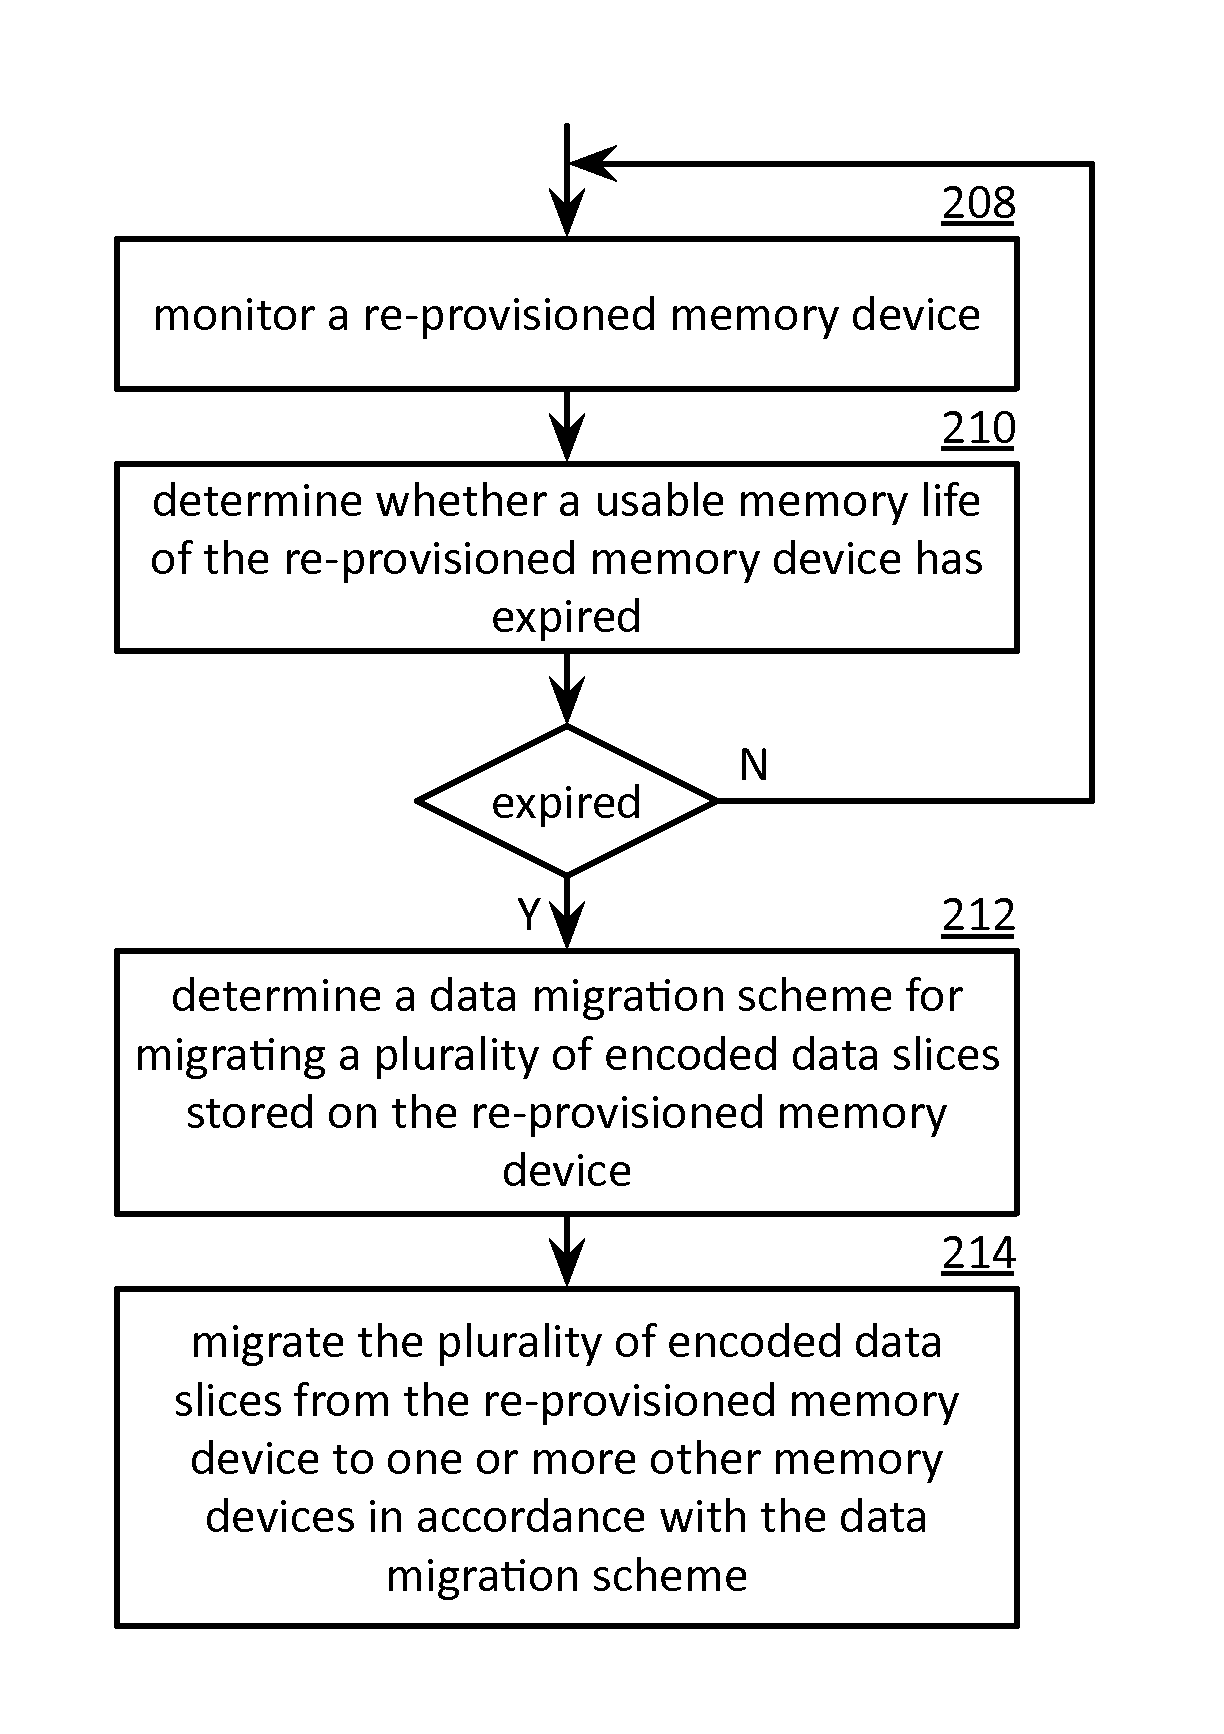 Migrating encoded data slices from a re-provisioned memory device of a dispersed storage network memory